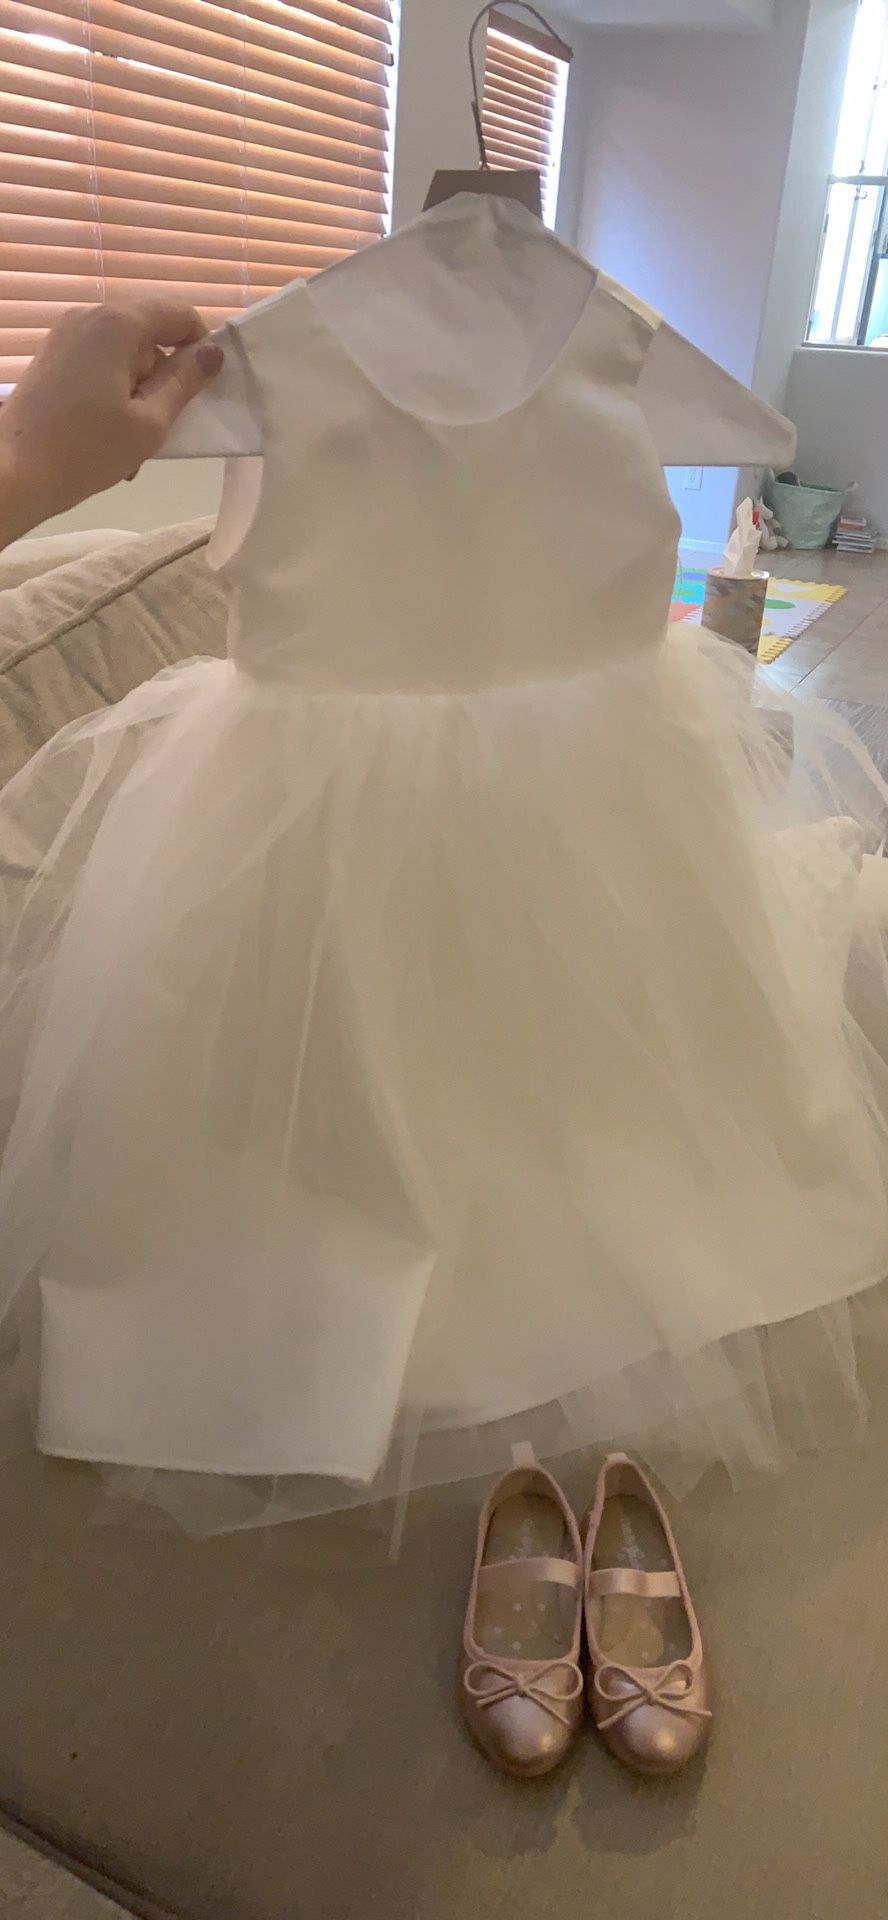 Flower girl dress with sash size 2T and size 4 shoes